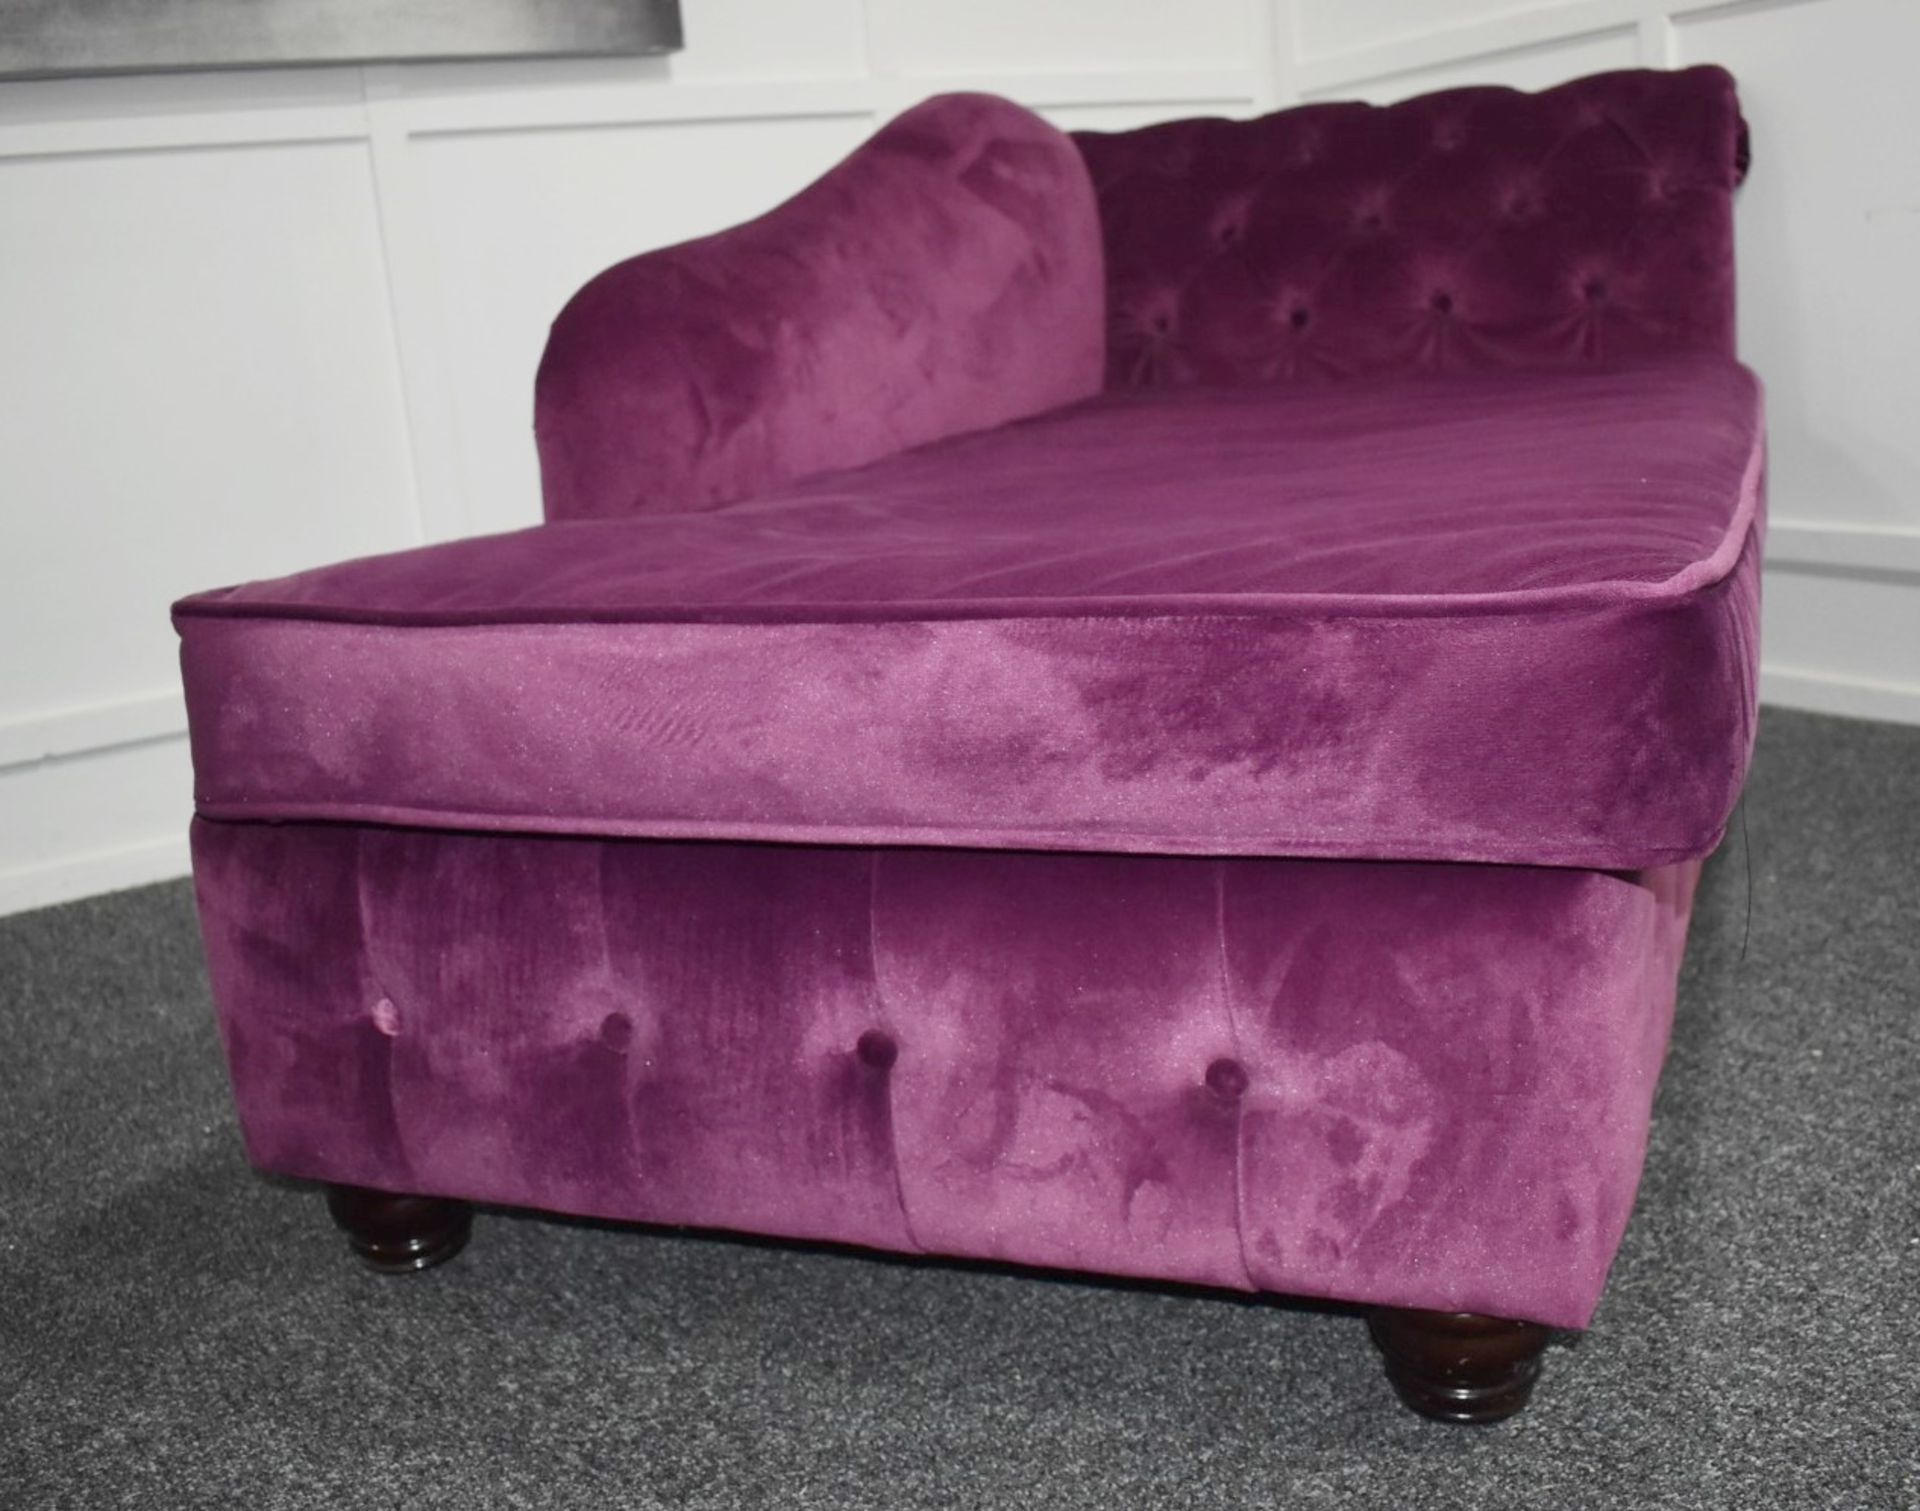 1 x Elegant Chesterfield-style Button-back Chaise Lounge, Richly Upholstered in a Mulberry - Image 7 of 10